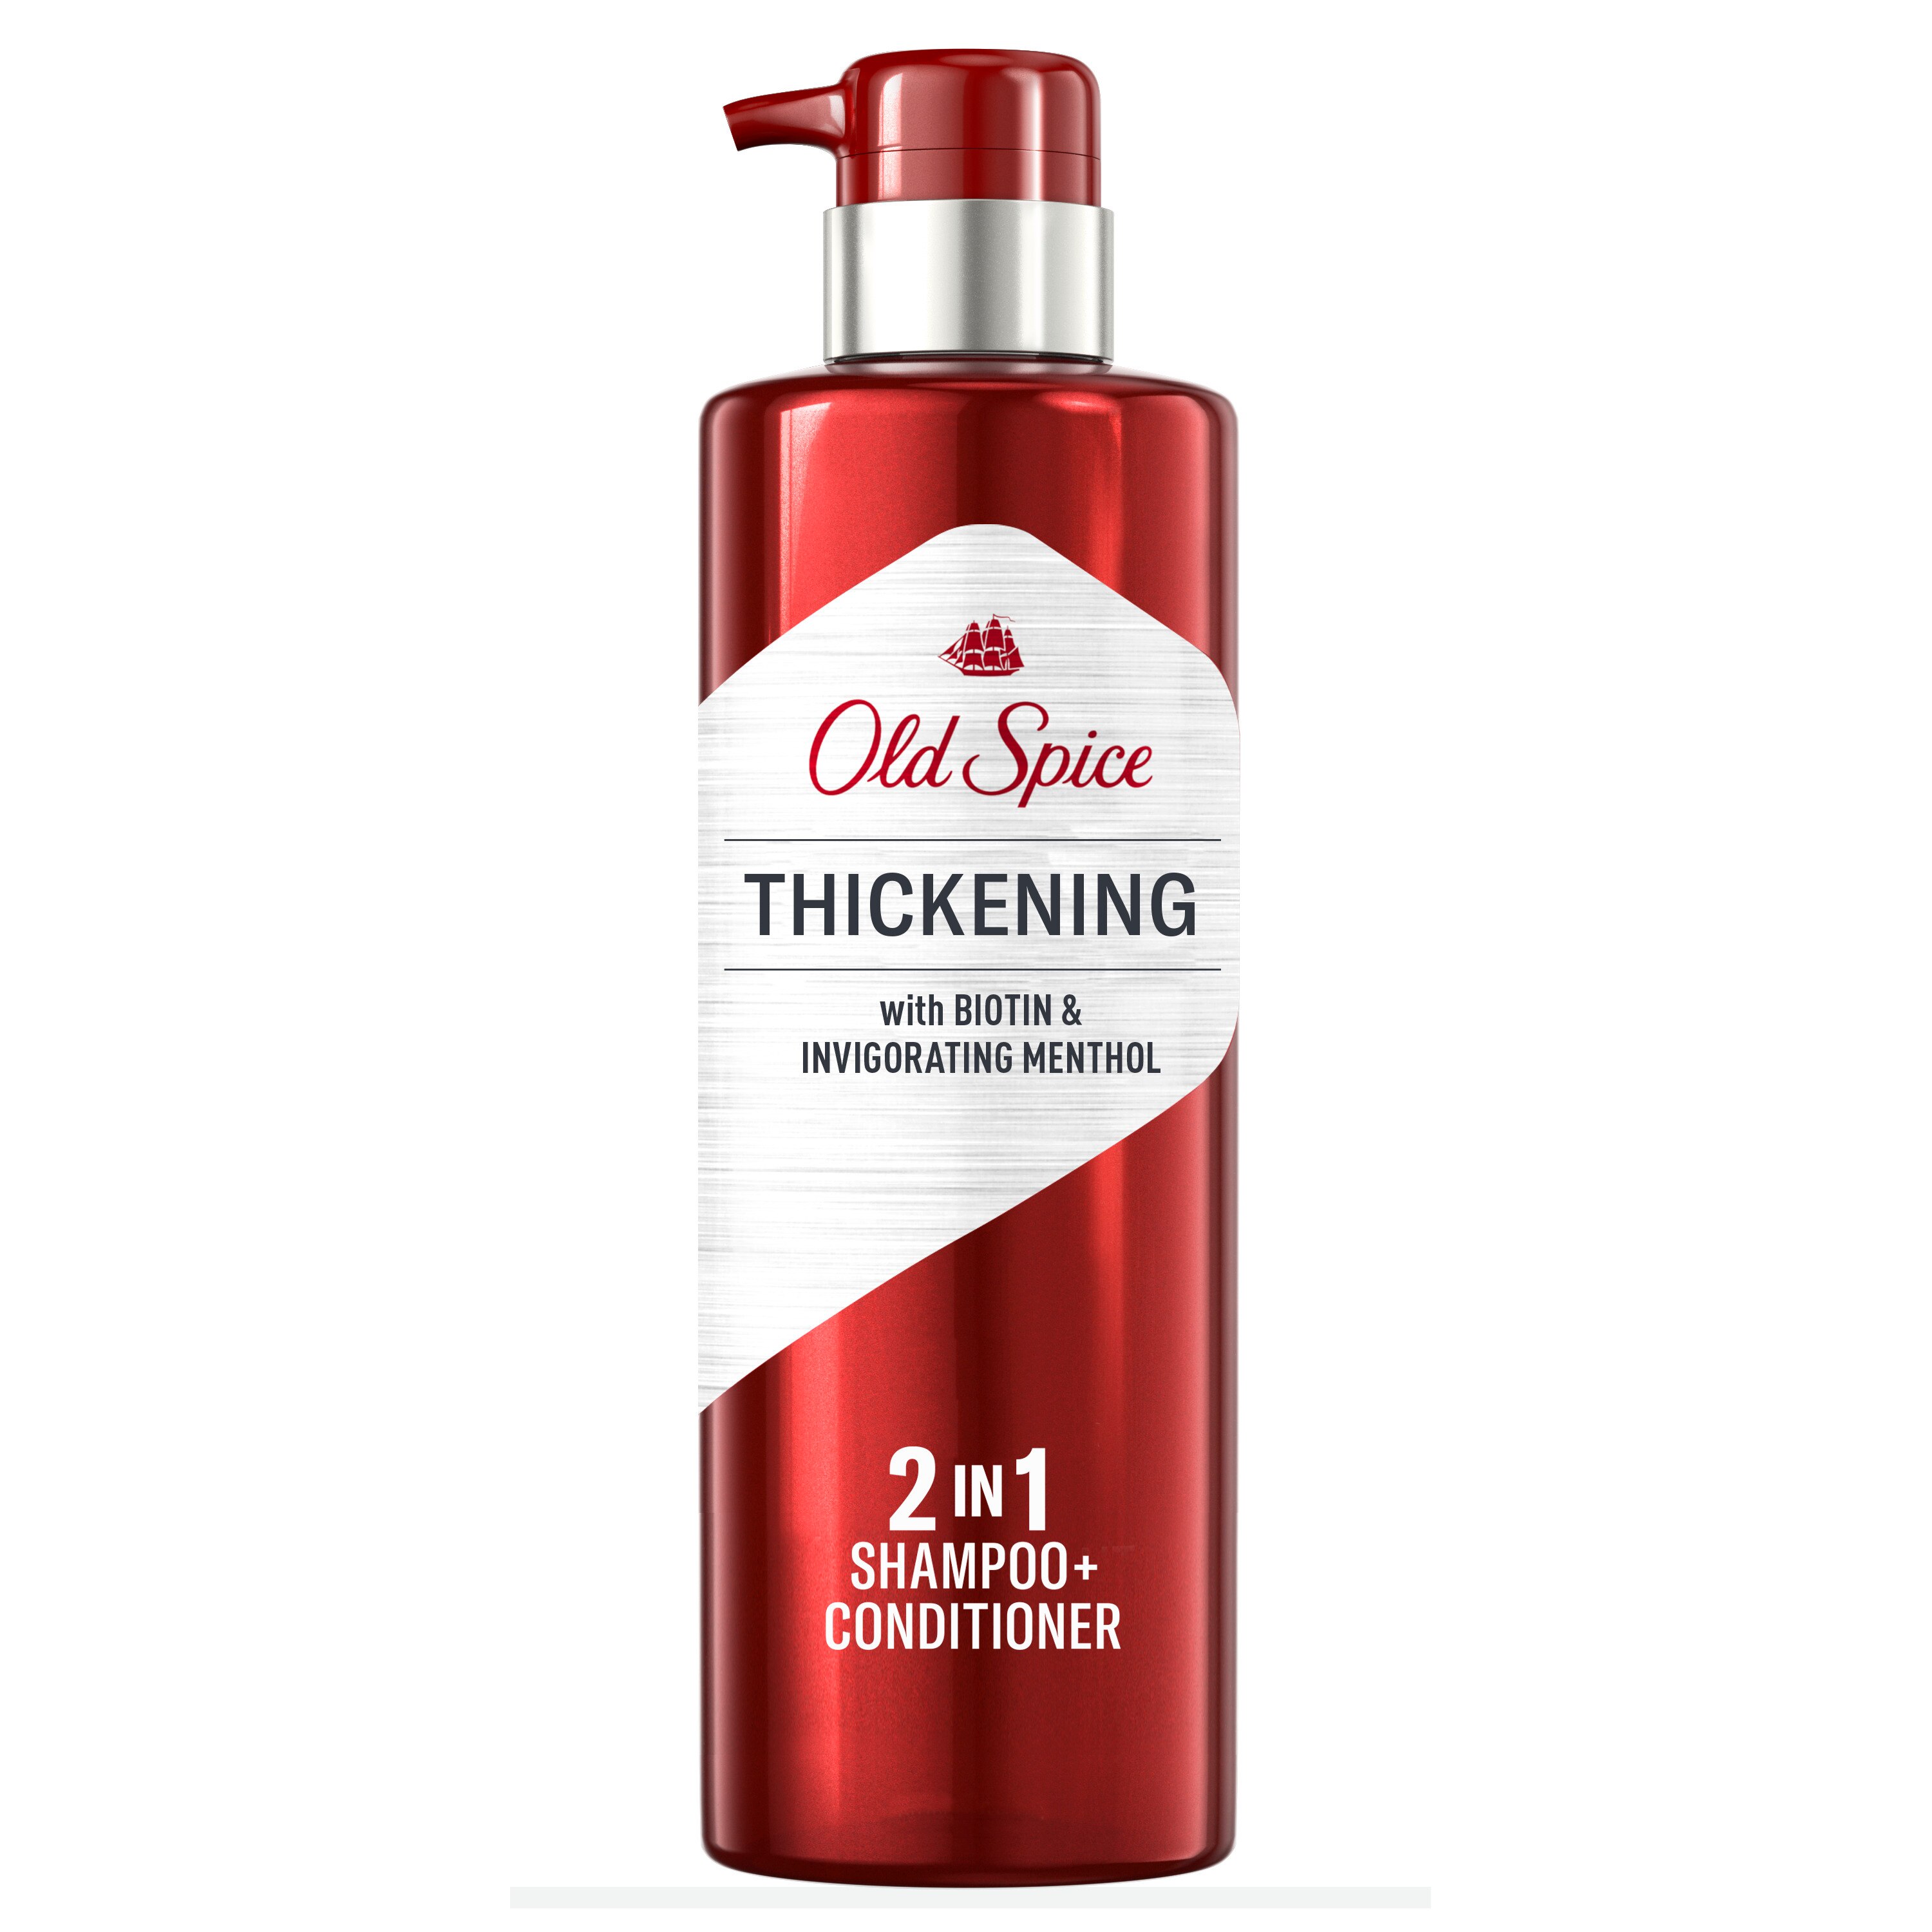 Old Spice Thickening 2 in 1 Men's Shampoo and Conditioner with Biotin, 17.9 OZ